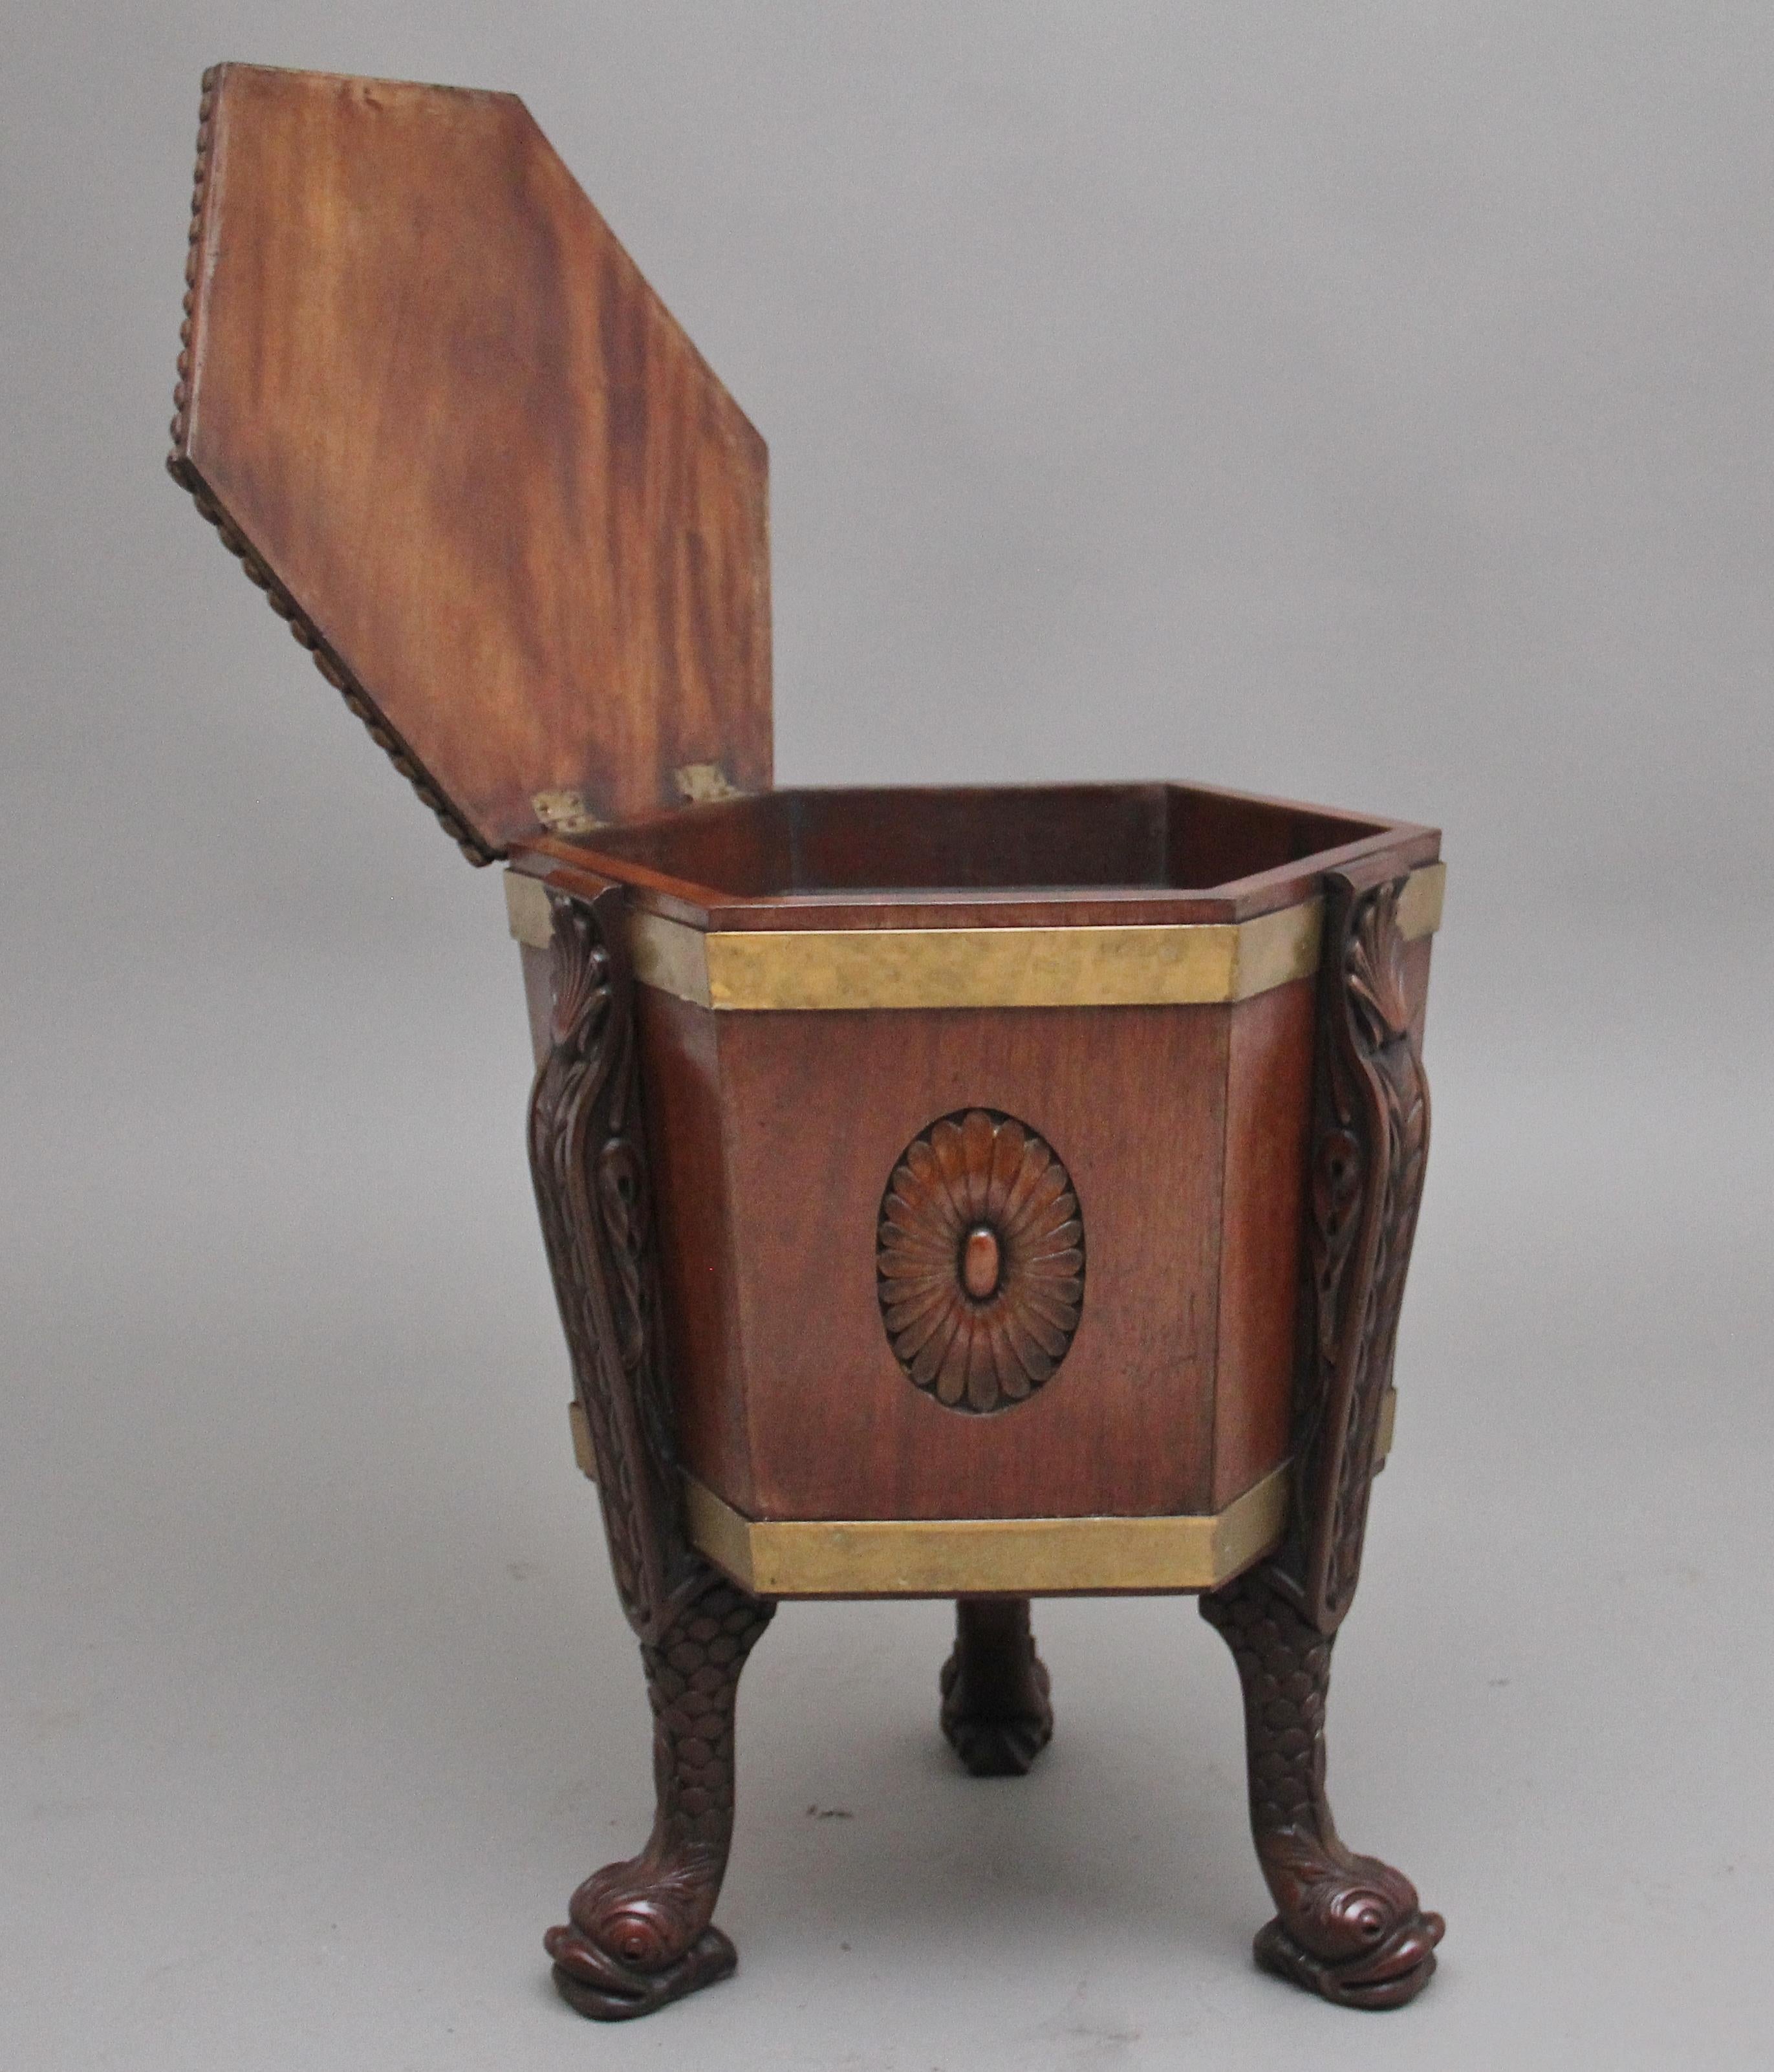 A highly decorative early 20th Century mahogany hexagon shaped wine cooler / cellarette in the Regency style, the shaped top having a gadrooned edge with a carved shell and turned and fluted finial at the centre, the hinged top opening to reveal